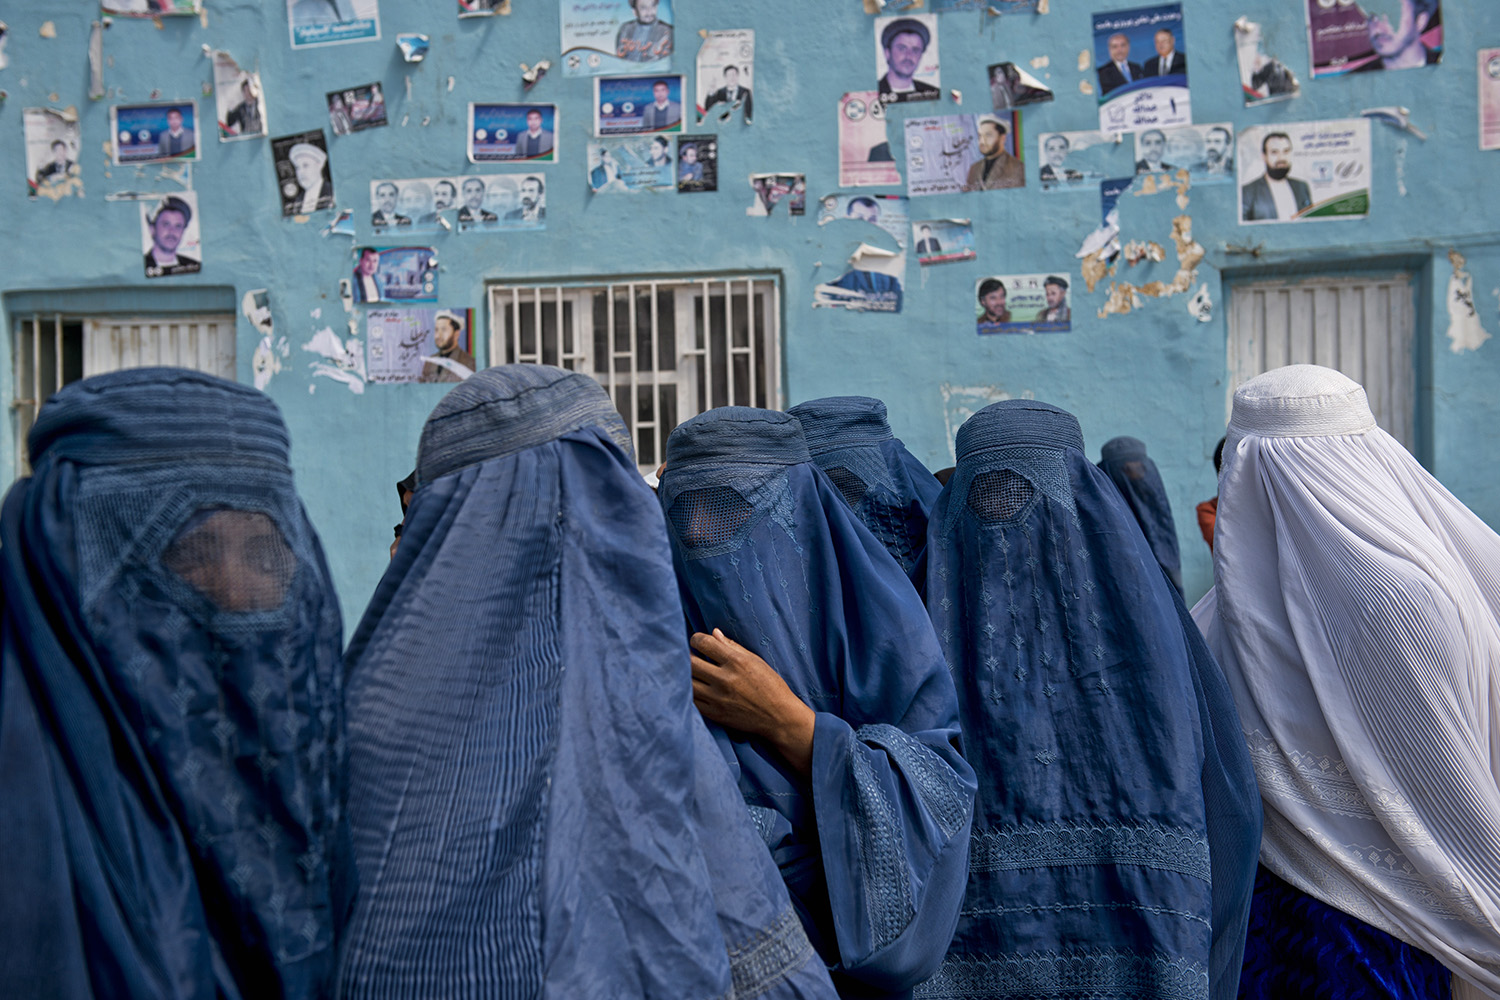 Afghan women leave an election rally at a stadium in Mazar-i-Sharif, Afghanistan, March 27, 2014.